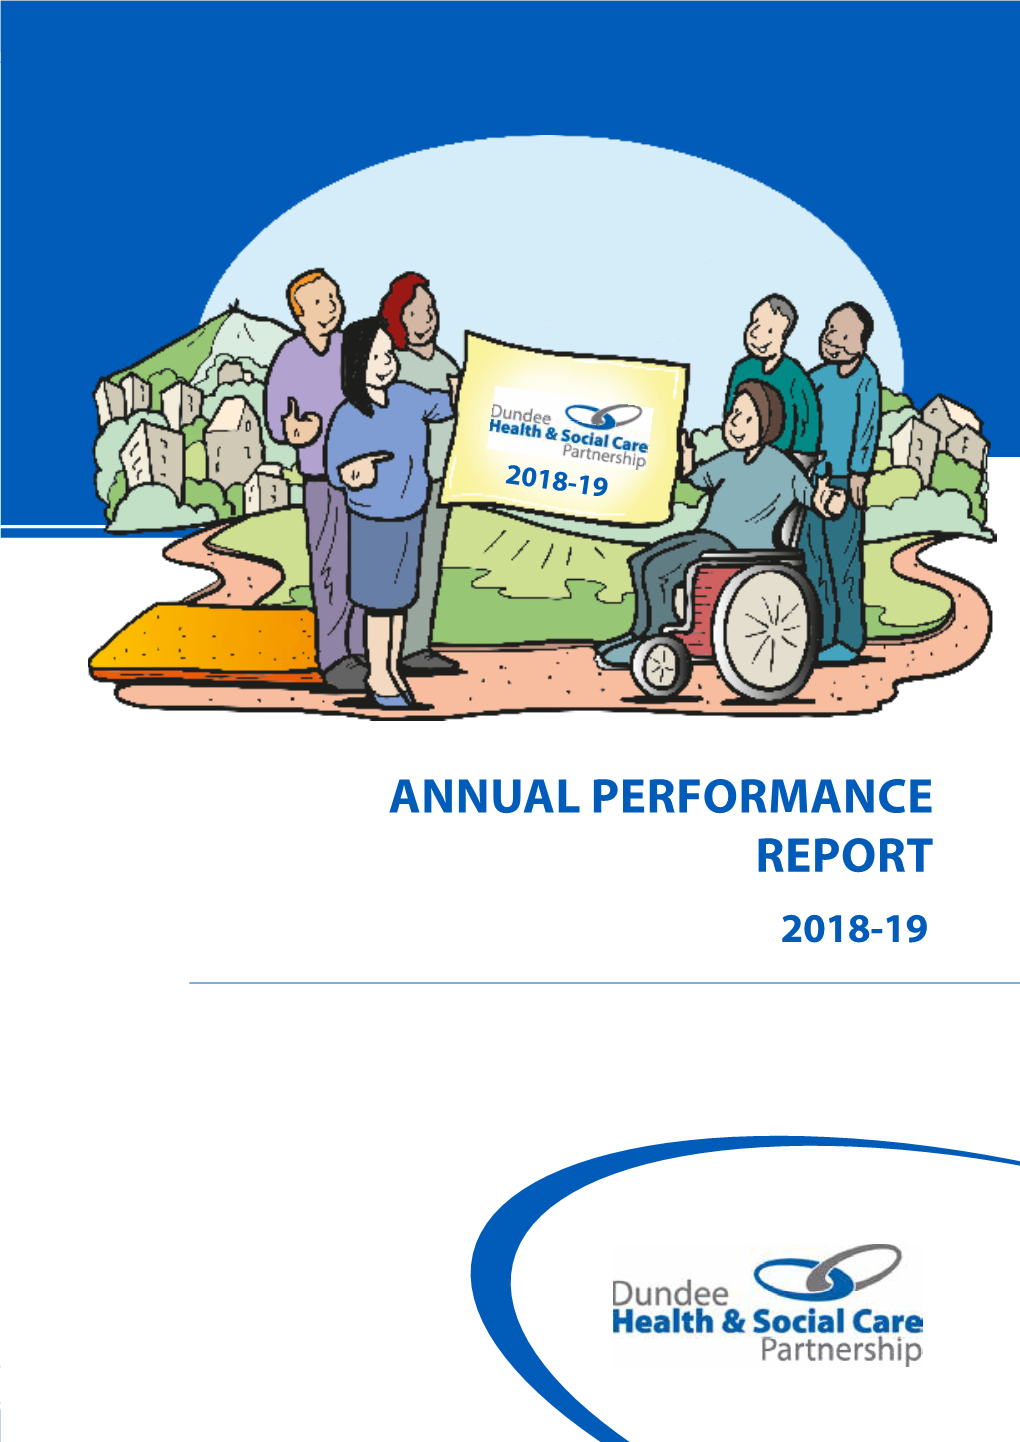 Annual Performance Report 2018-19